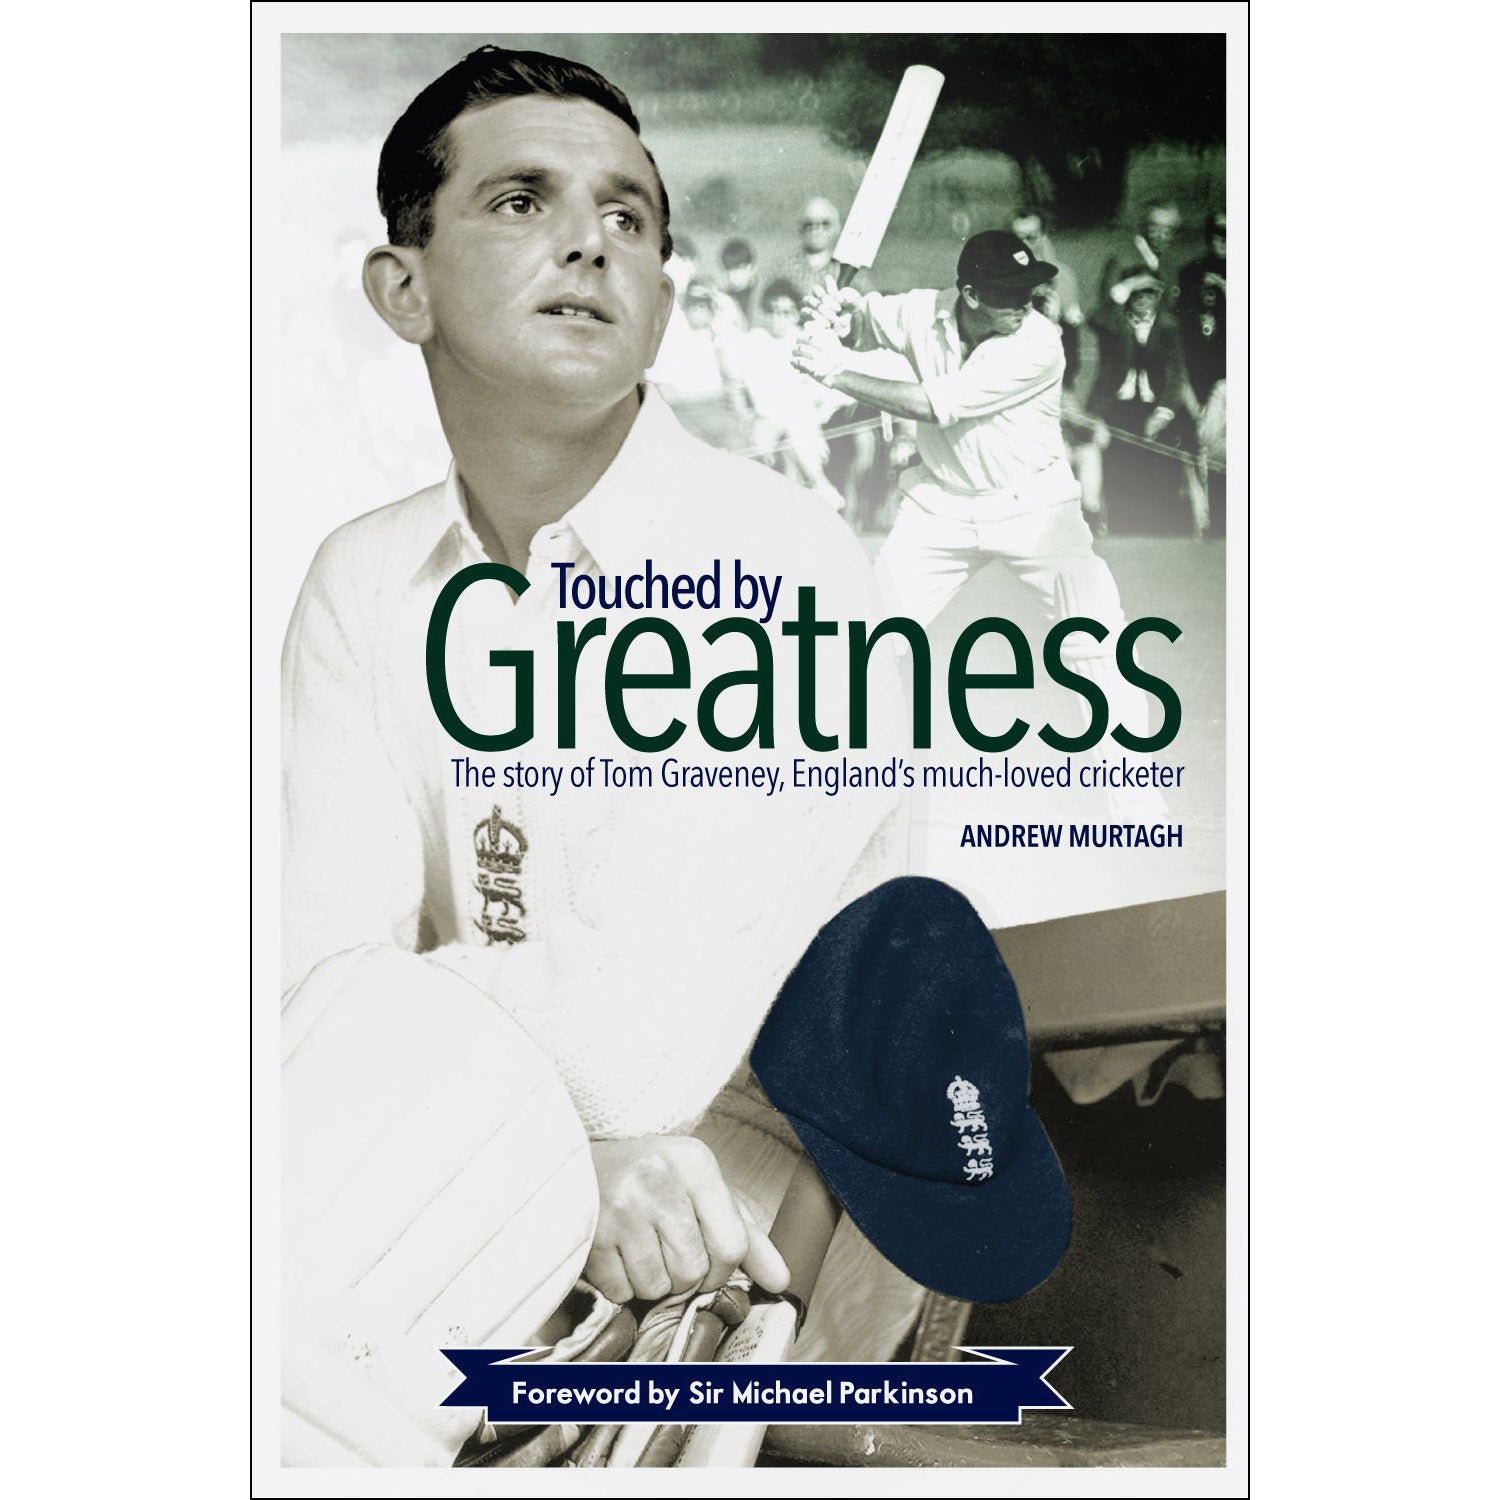 Touched by Greatness – The Story of Tom Graveney, England's Much Loved Cricketer